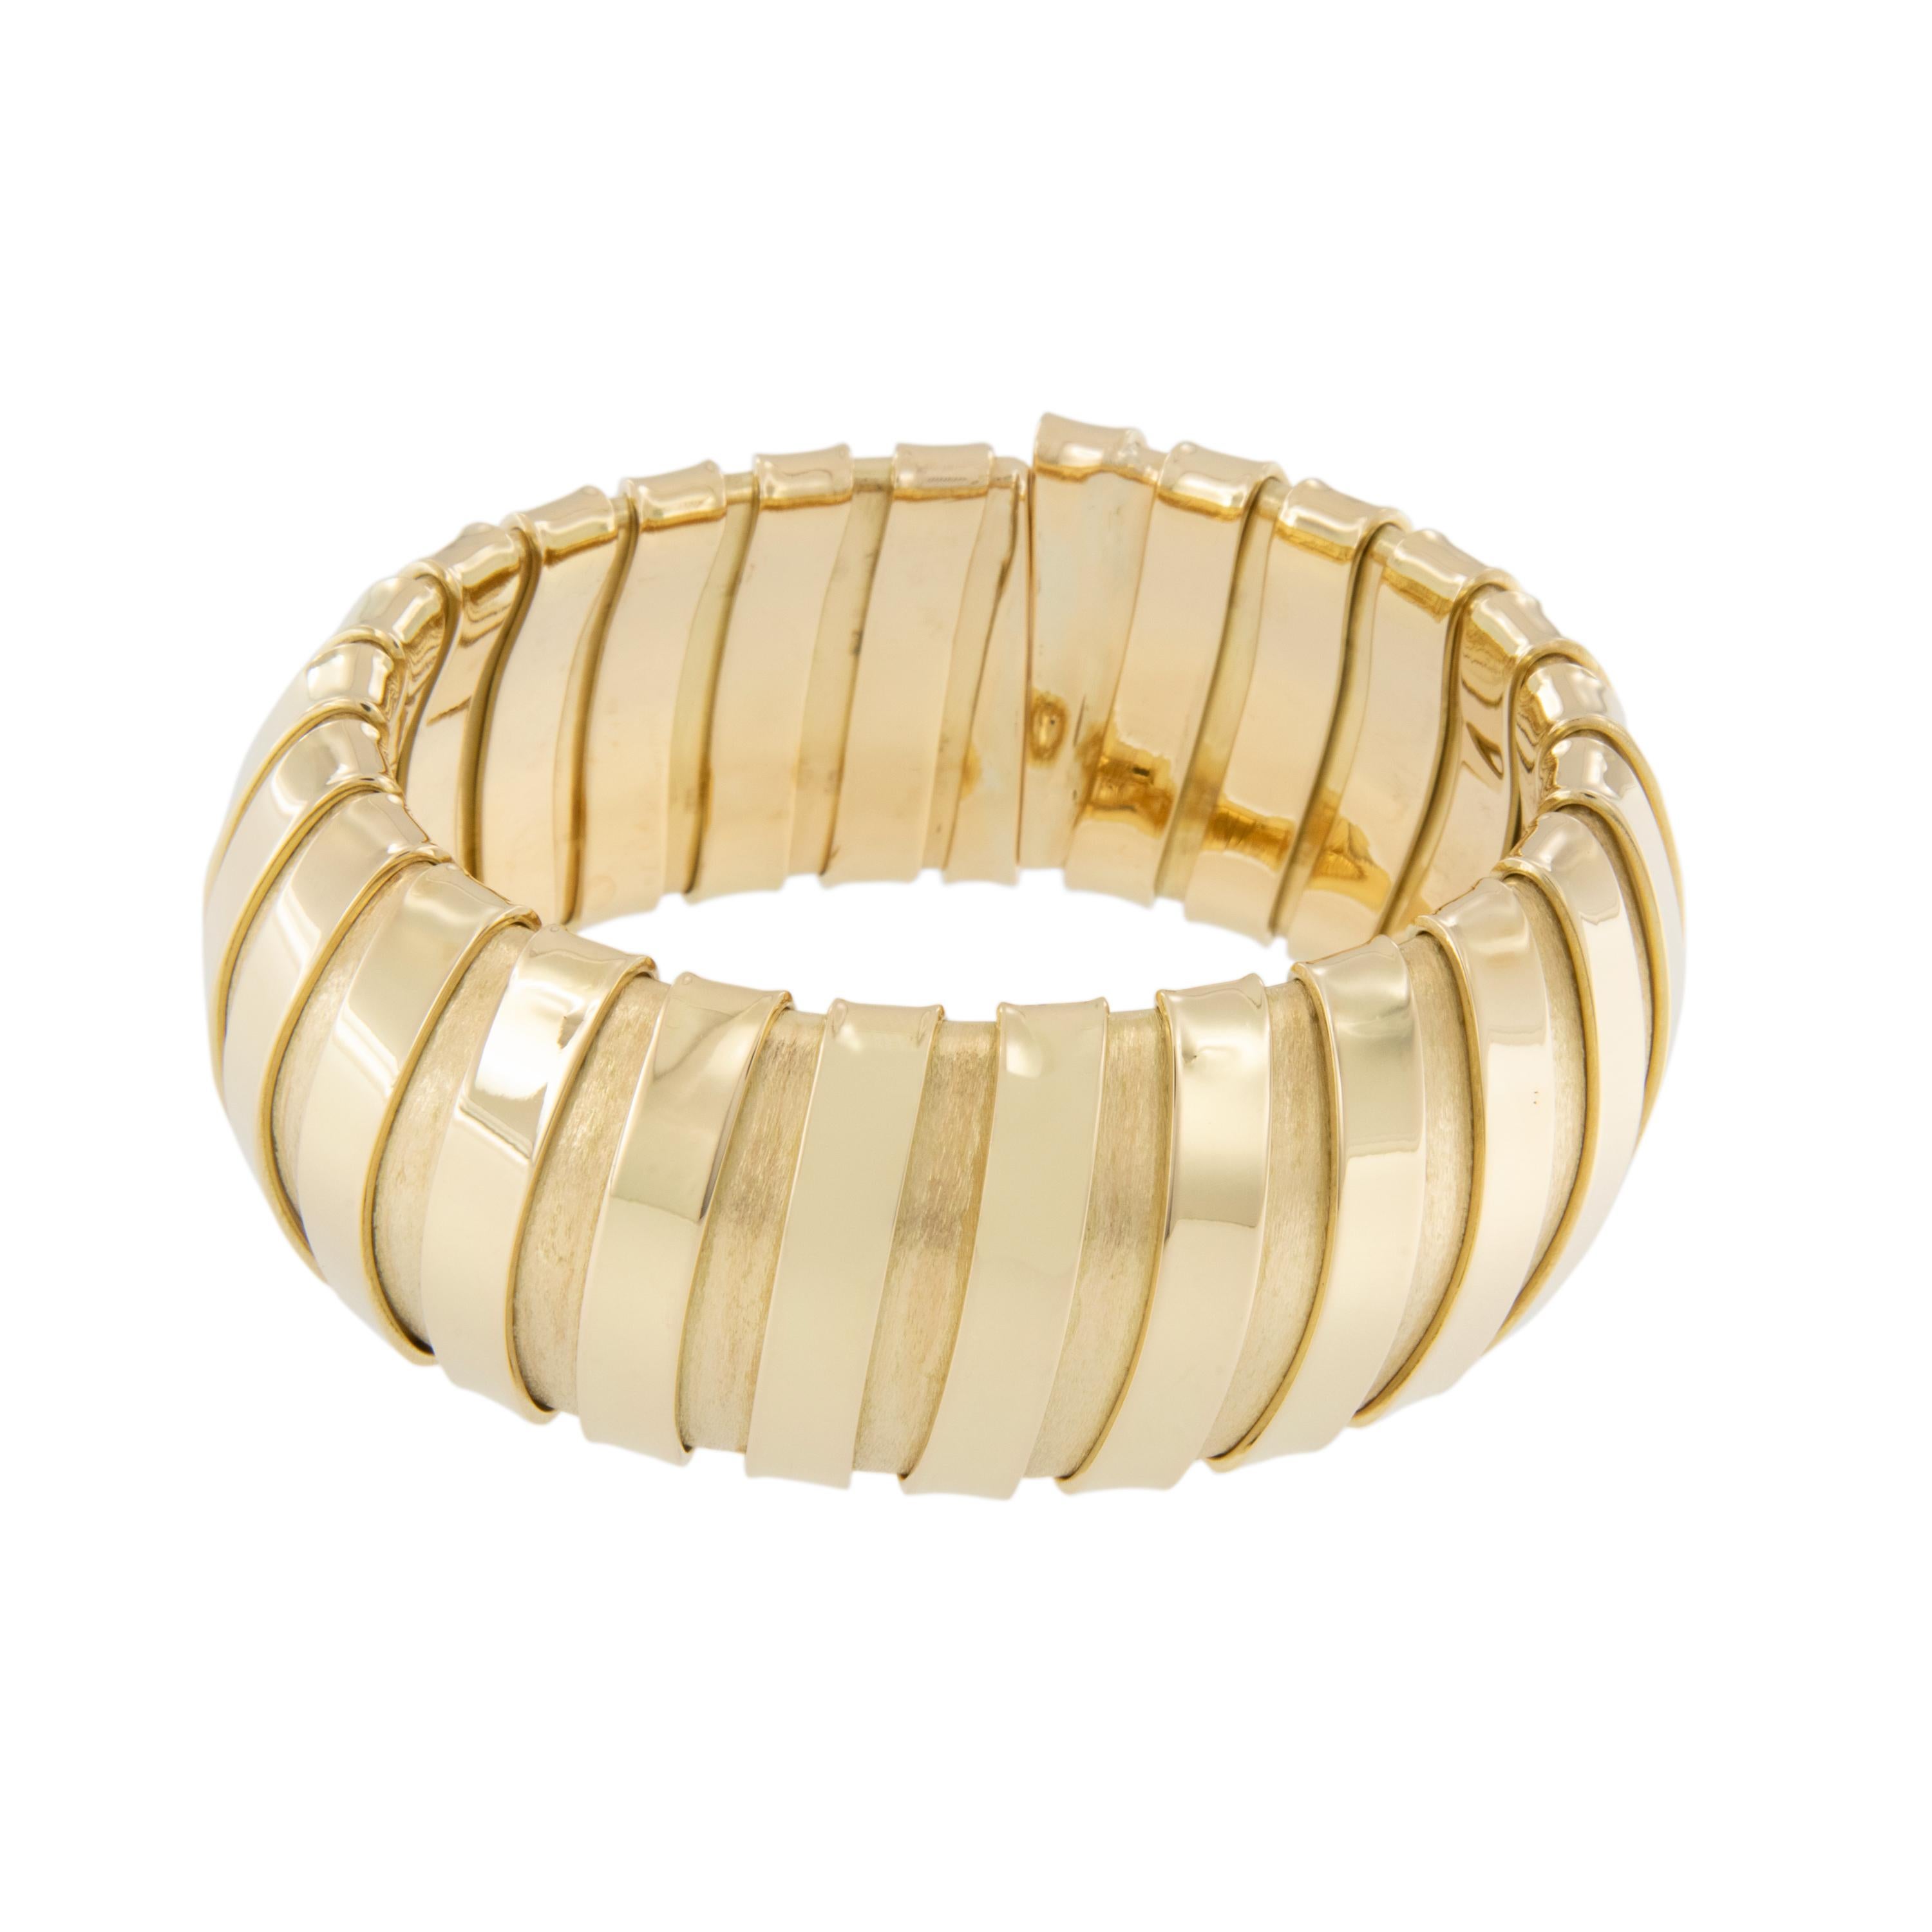 What is a Tubogas bracelet?
Tubogas literally translates to mean a “gas pipe” and is used to describe a certain type of flexible tubular chain that is formed by the pairing of multiple gold strips that have been tightly wound together. Expertly made